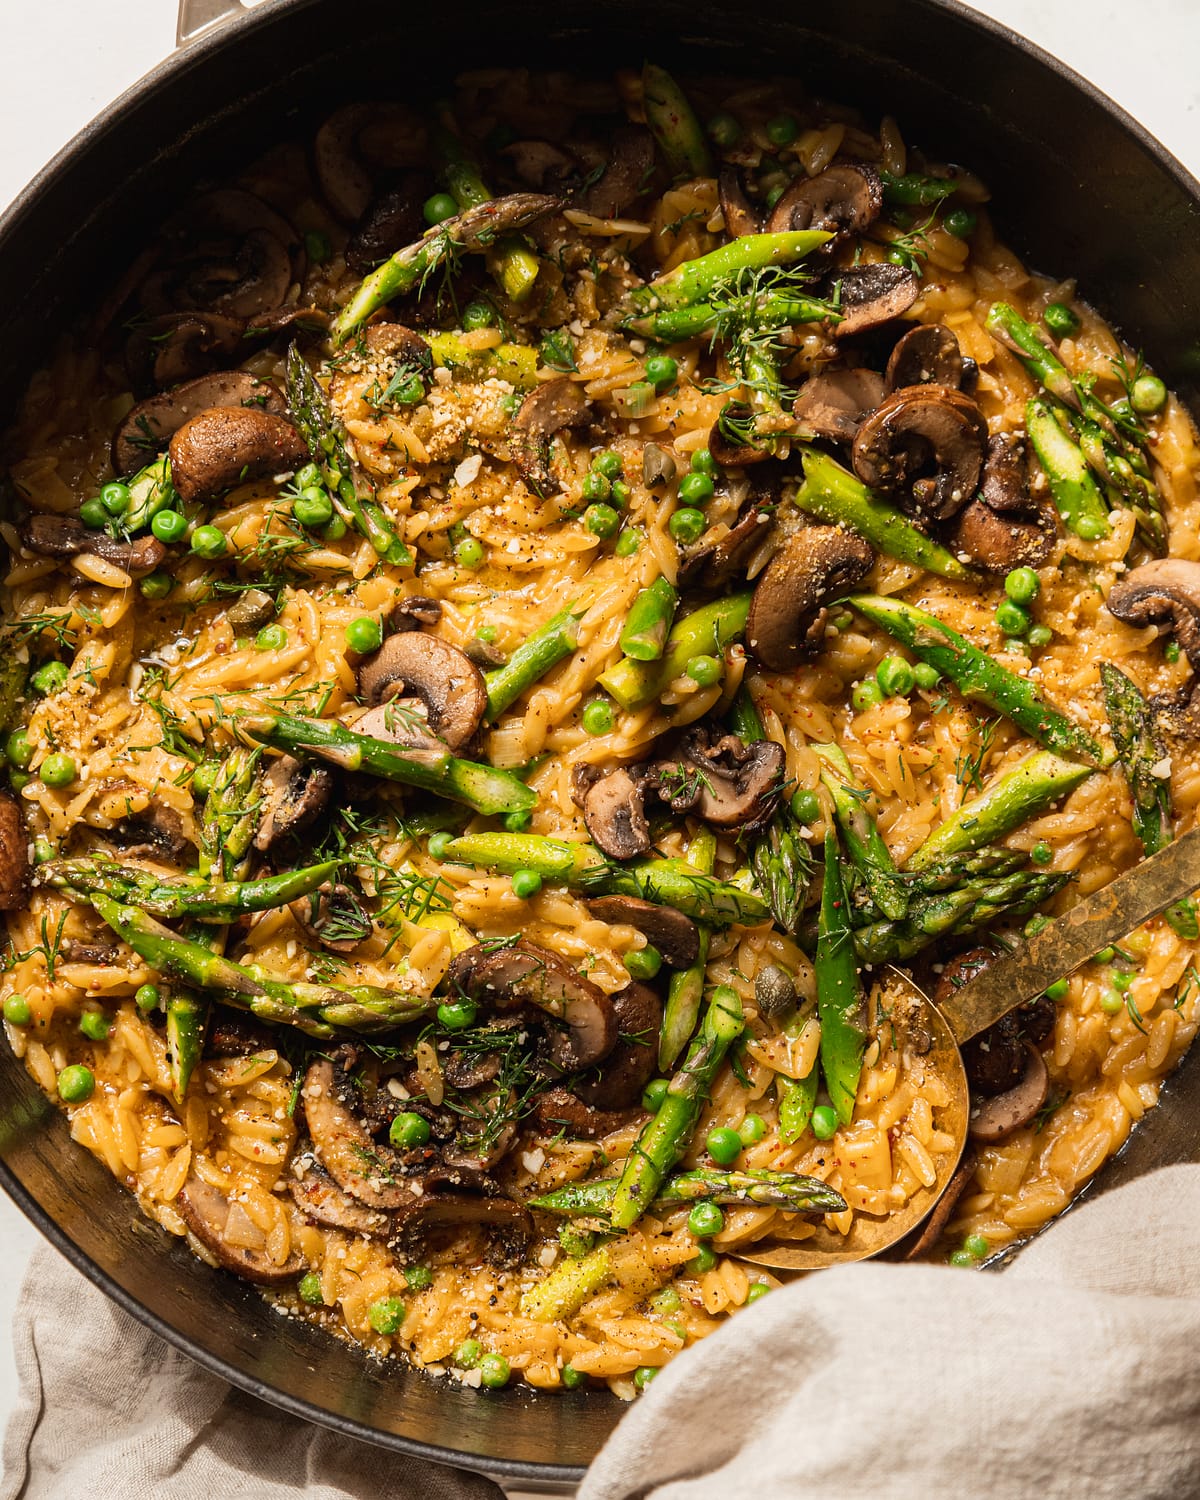 An overhead shot of creamy mushroom asparagus orzo with peas and bits of fresh dill on top. The orzo is in a braiser-style pot with a gold serving utensil sticking out. There is a beige napkin wrapped around the pot handle.